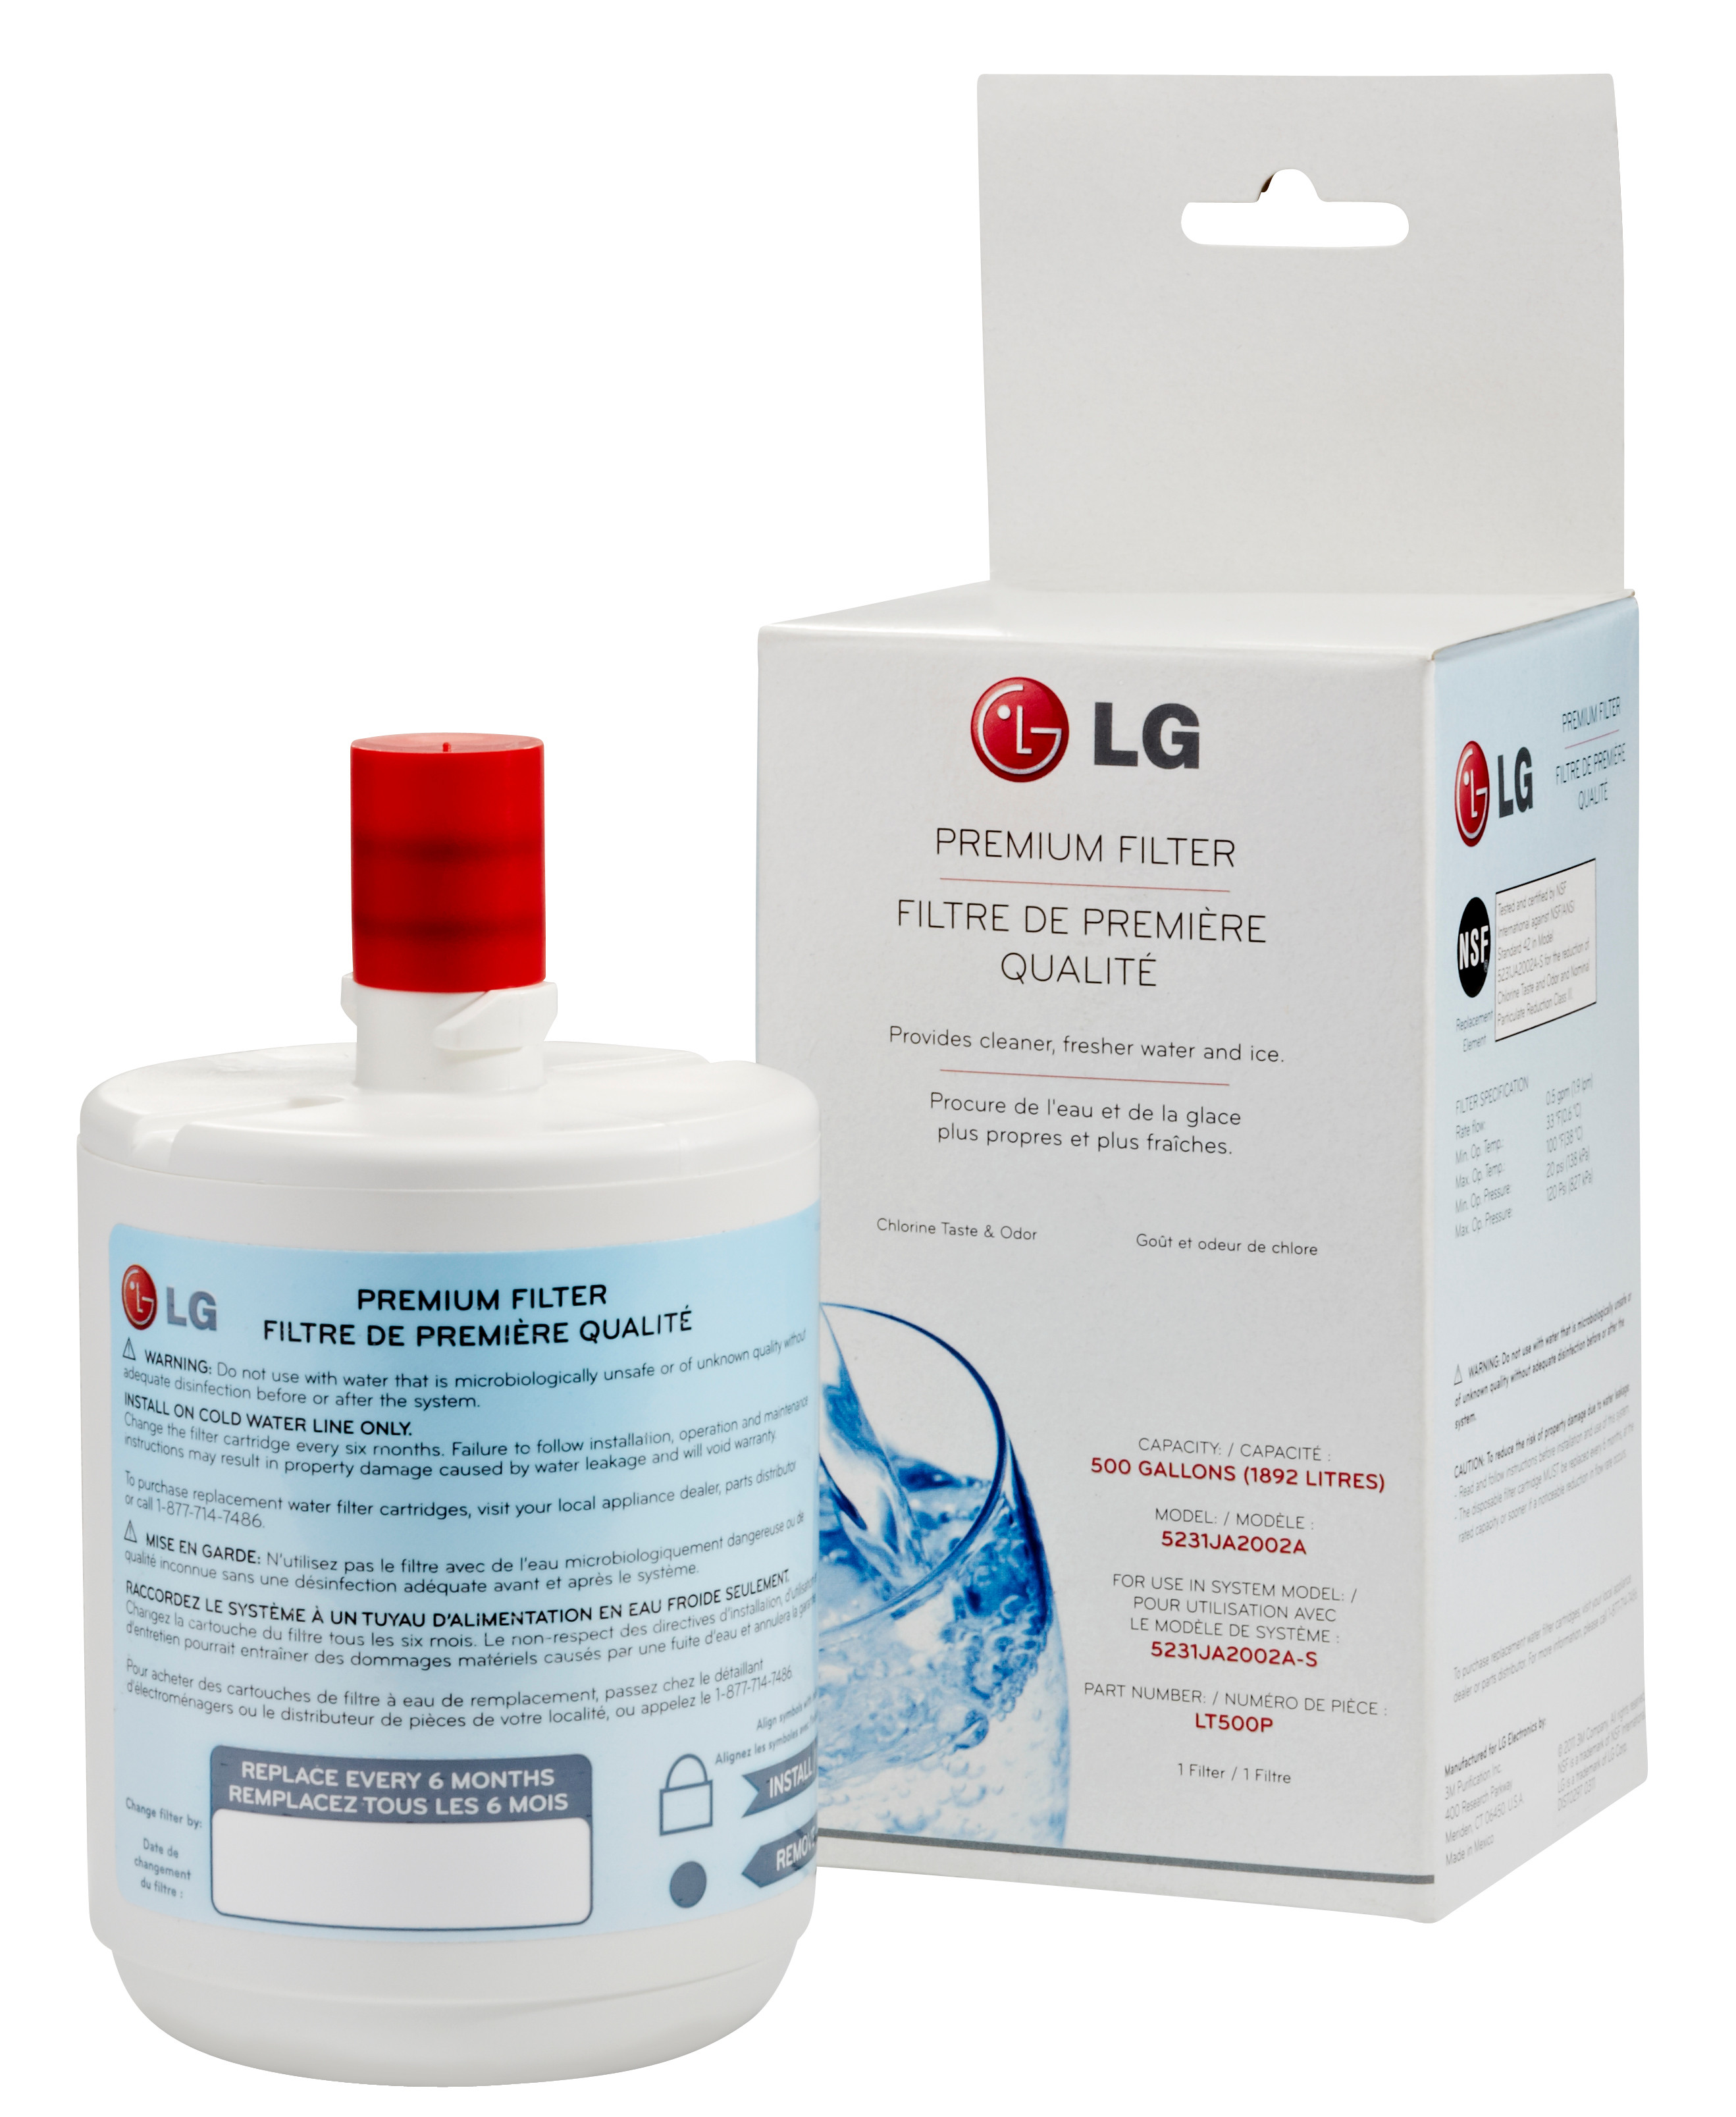 LG LT500PC 500-Gallon Water Filter for Select LG Refrigerators - image 1 of 2